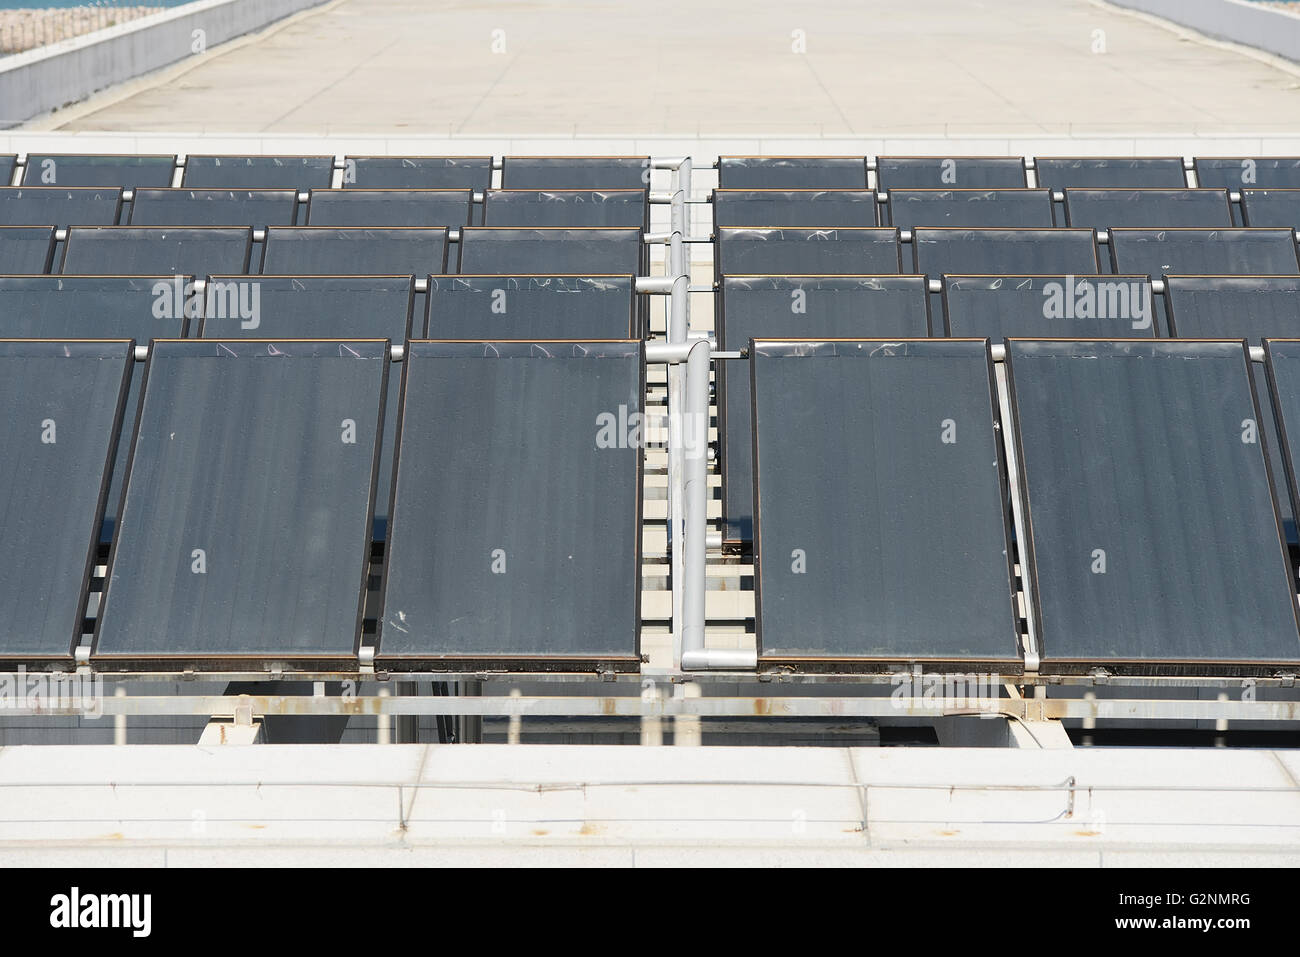 Solar water heating panel on a house roof Stock Photo